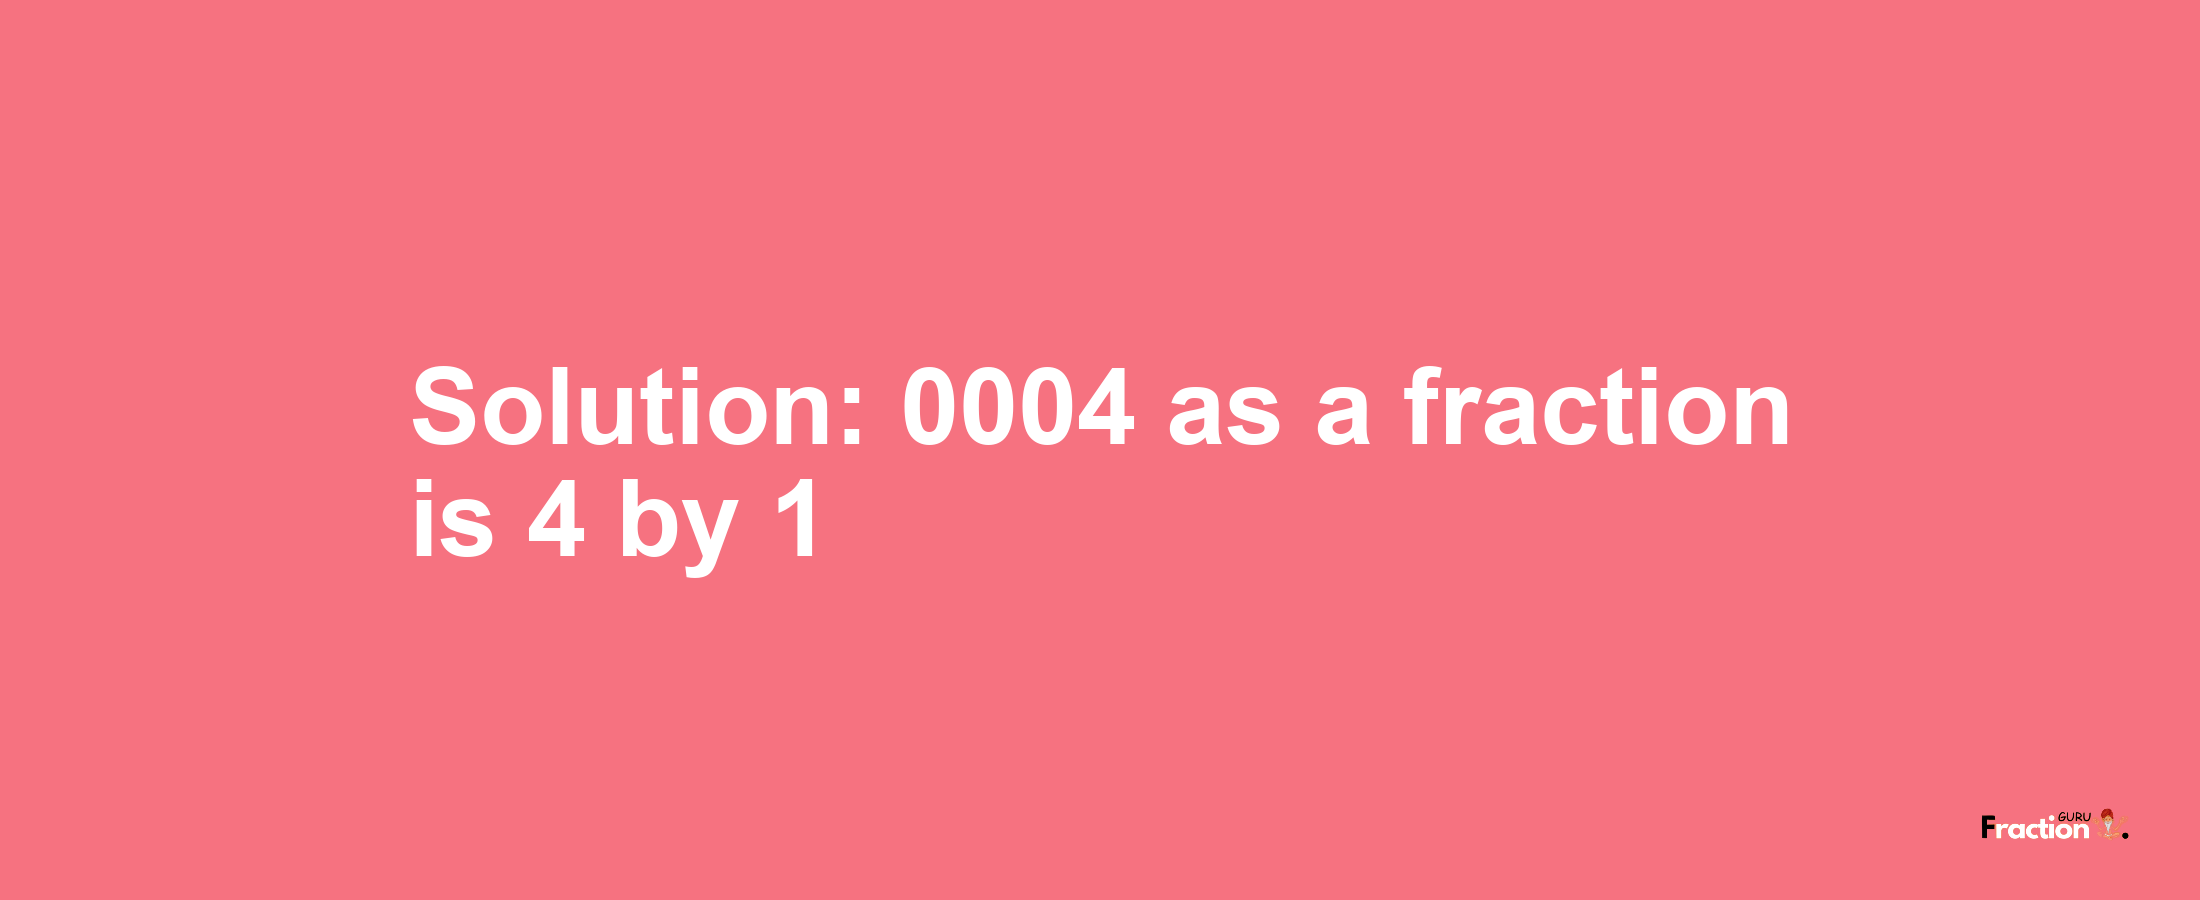 Solution:0004 as a fraction is 4/1